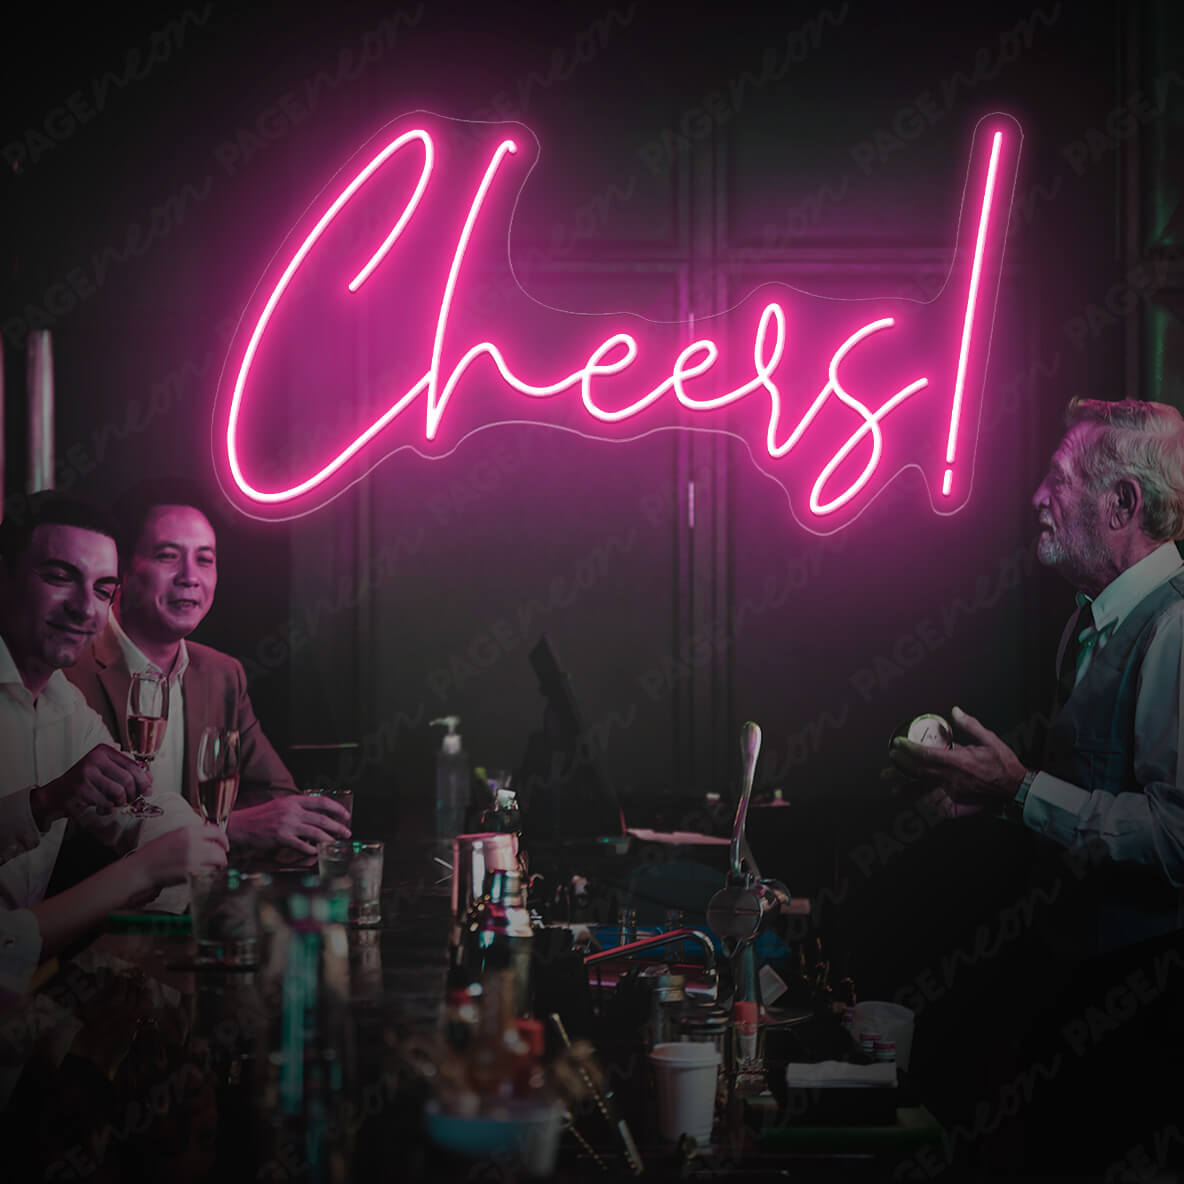 Cheers Neon Sign Bar Led Light Pink